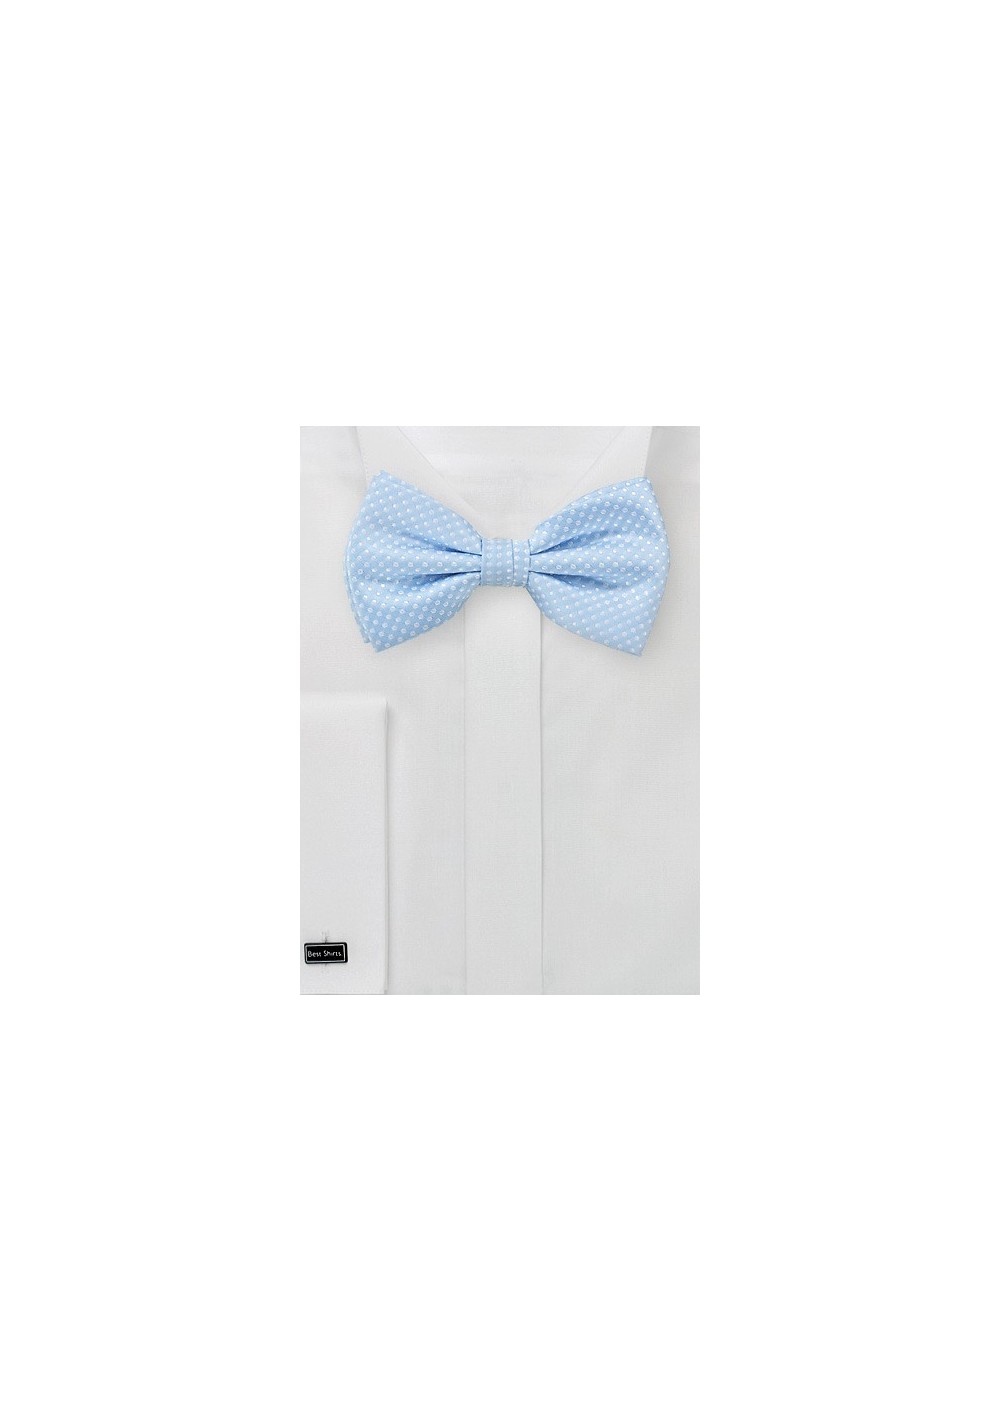 Baby Blue Bow Tie with White Pin Dots